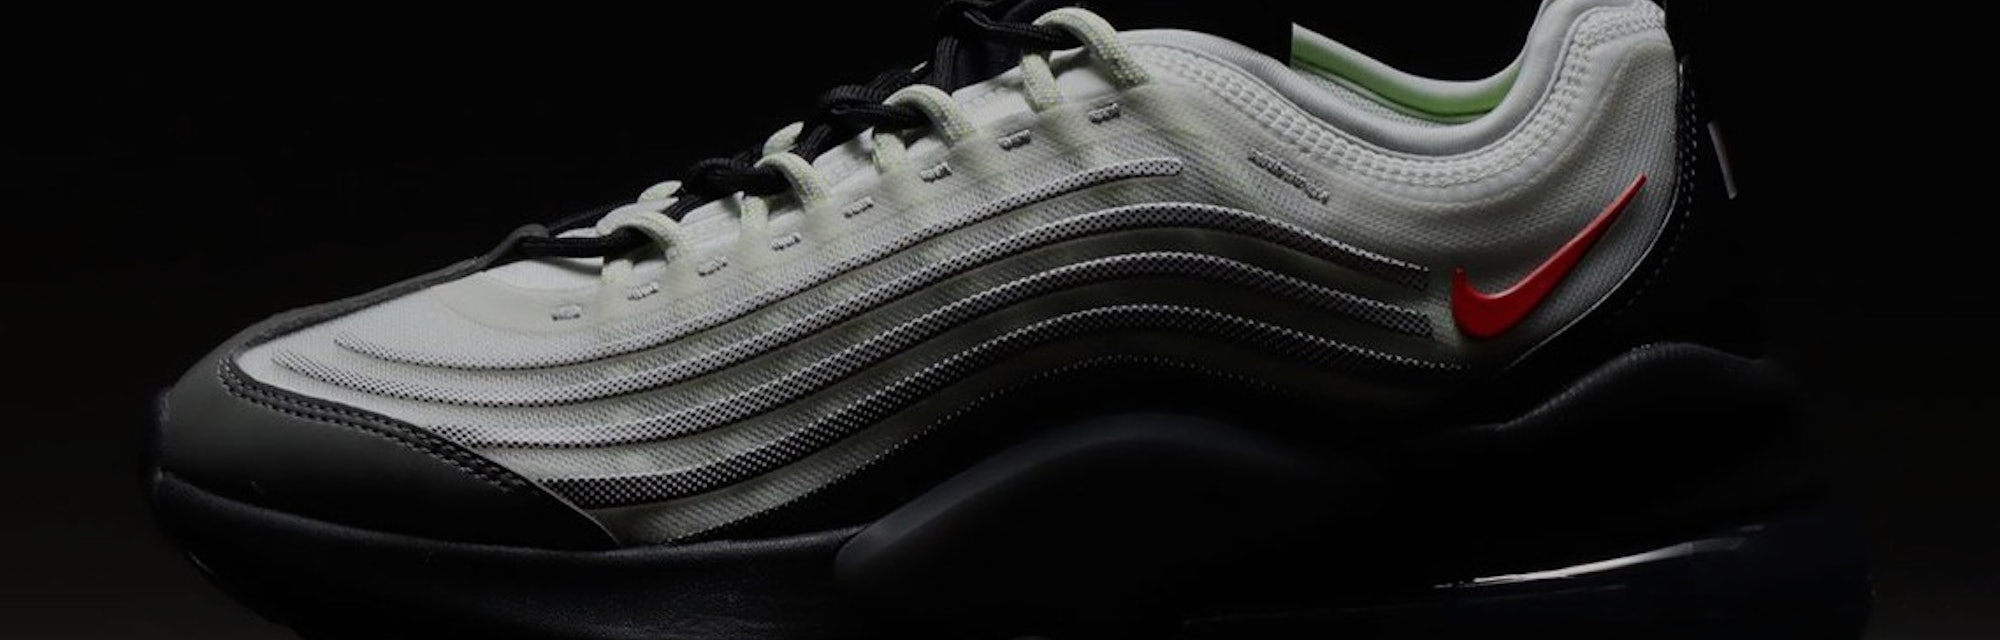 Nike upgrades a 25-year-old shoe with Max Zoom 950